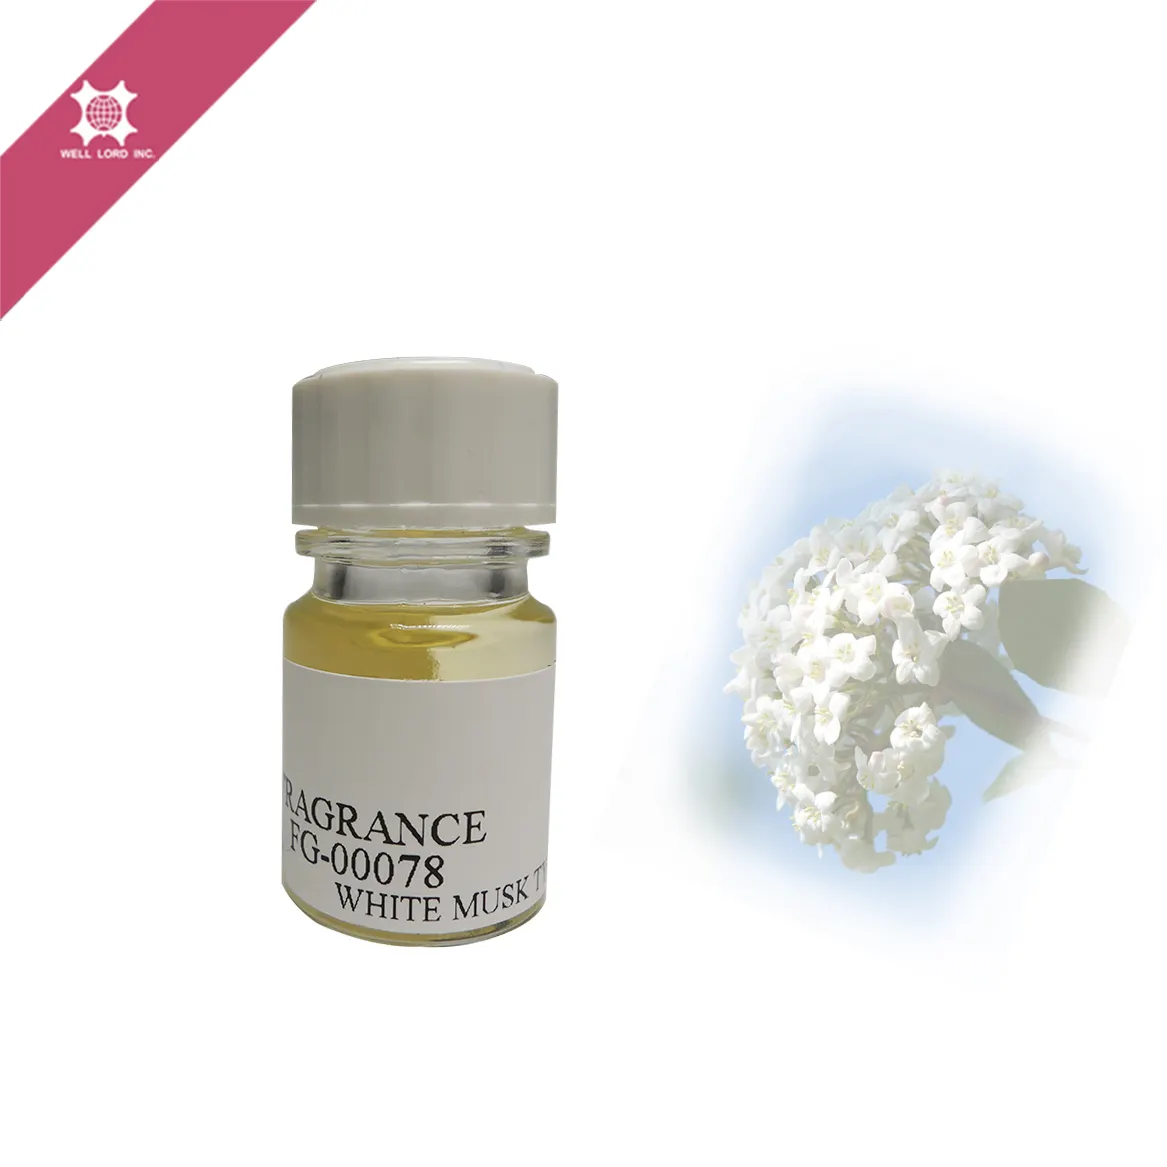 Perfume filling service create your own brand fragrance mix of rose jasmine amber wood in white musk